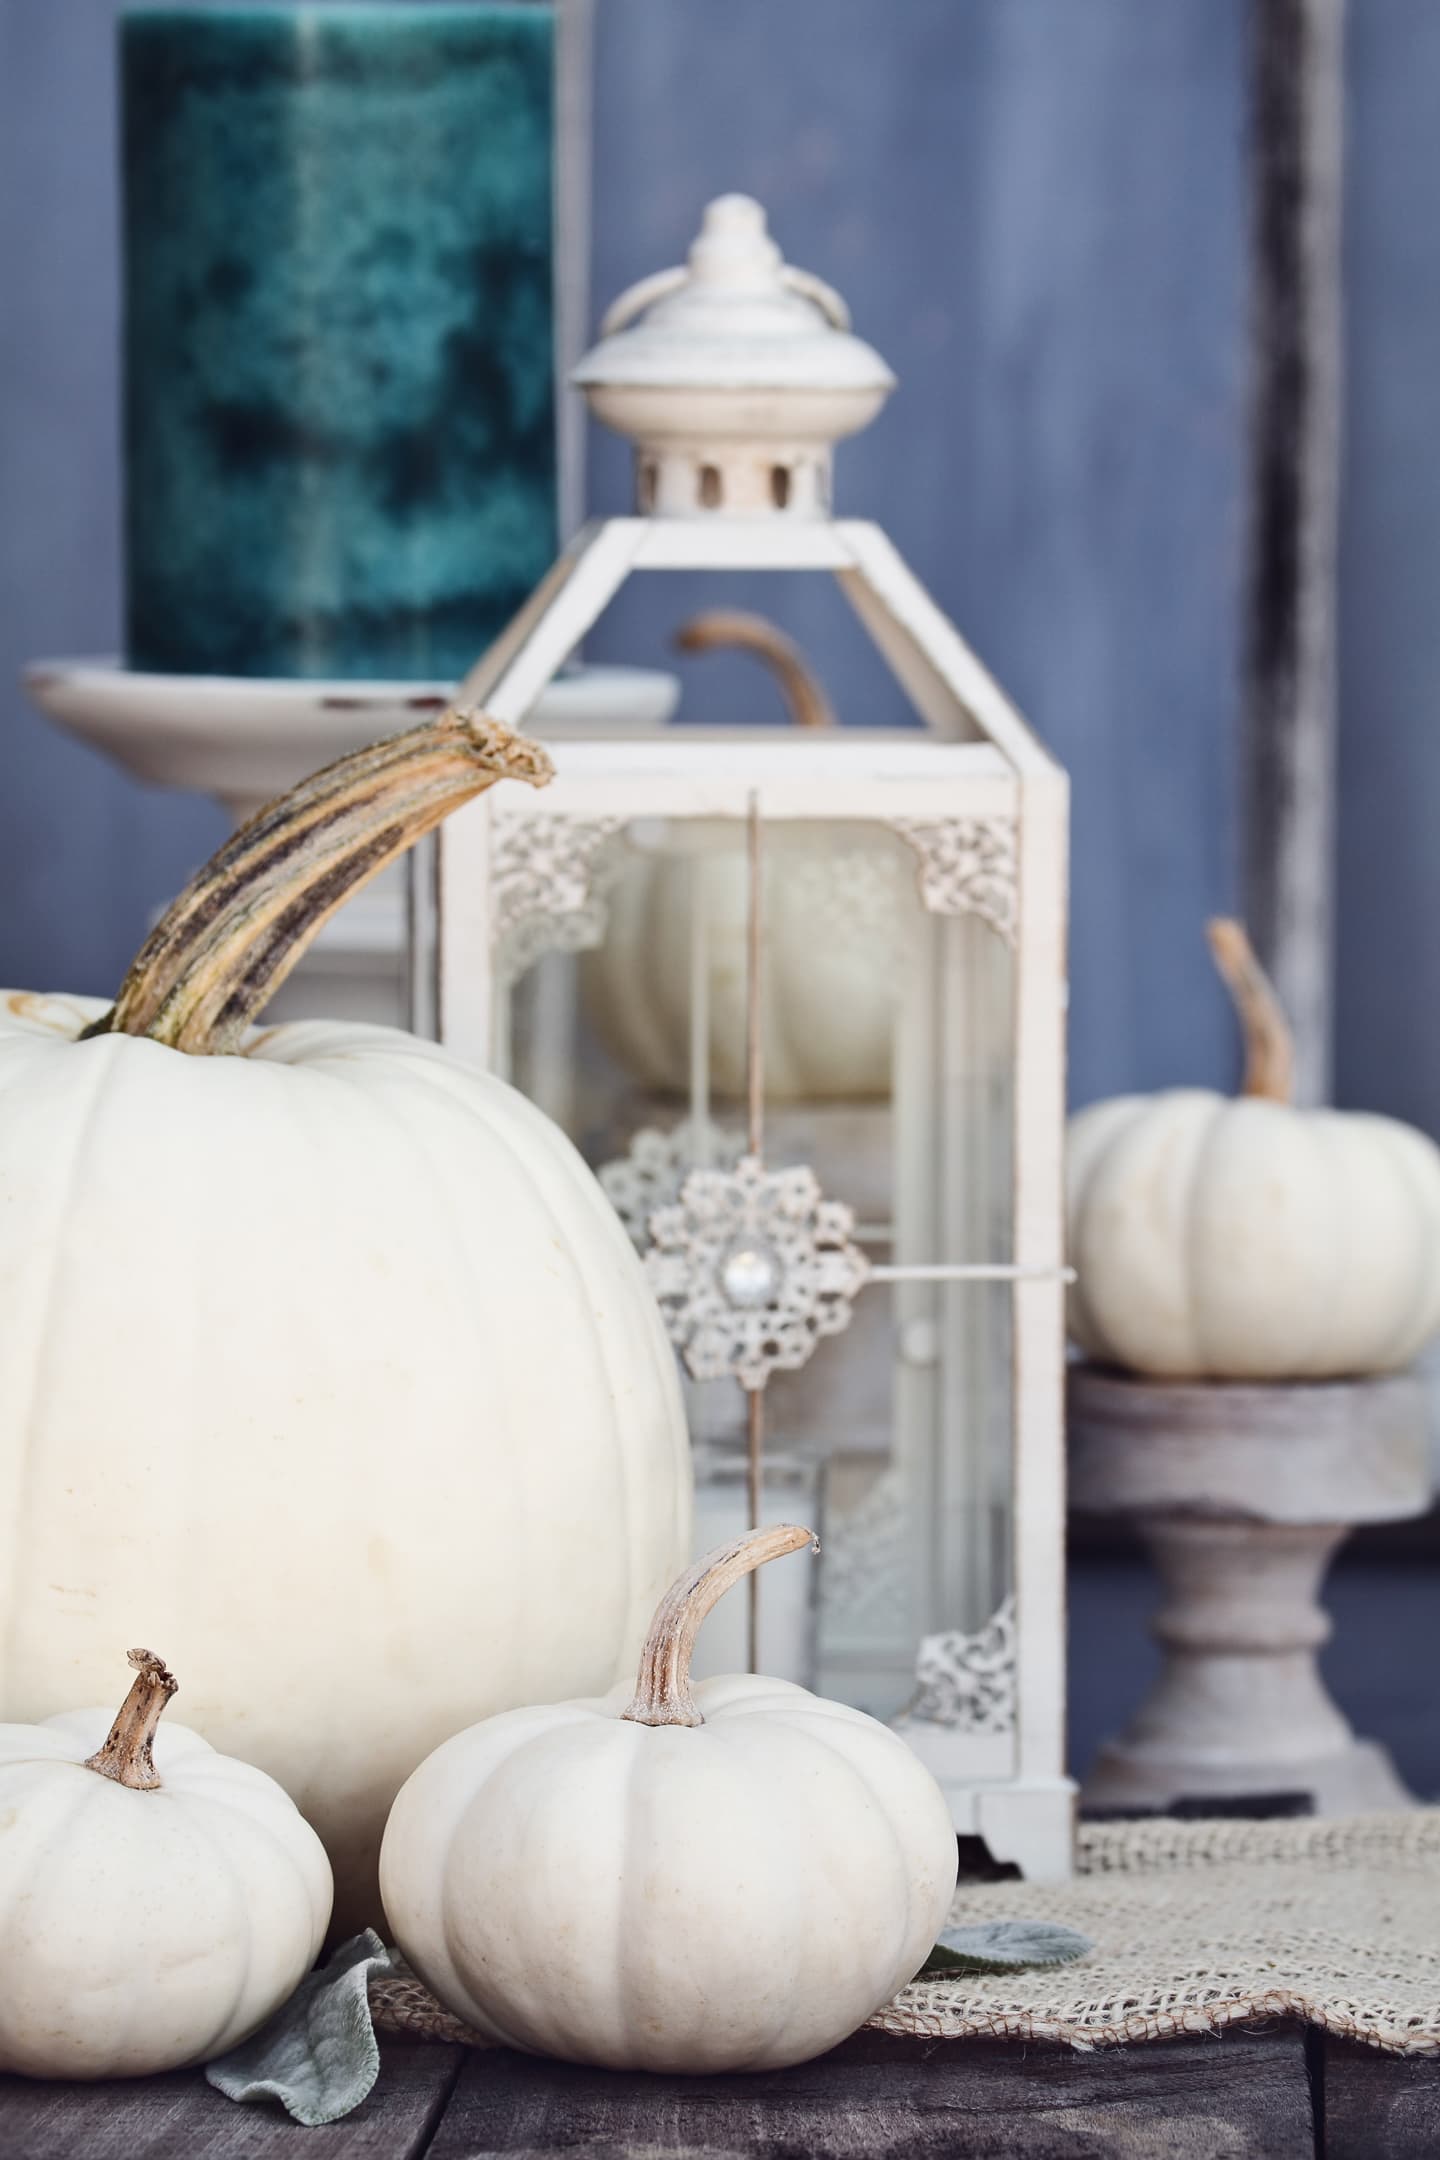 Fall home decor ideas featuring white pumpkins and a lantern on a wooden table.